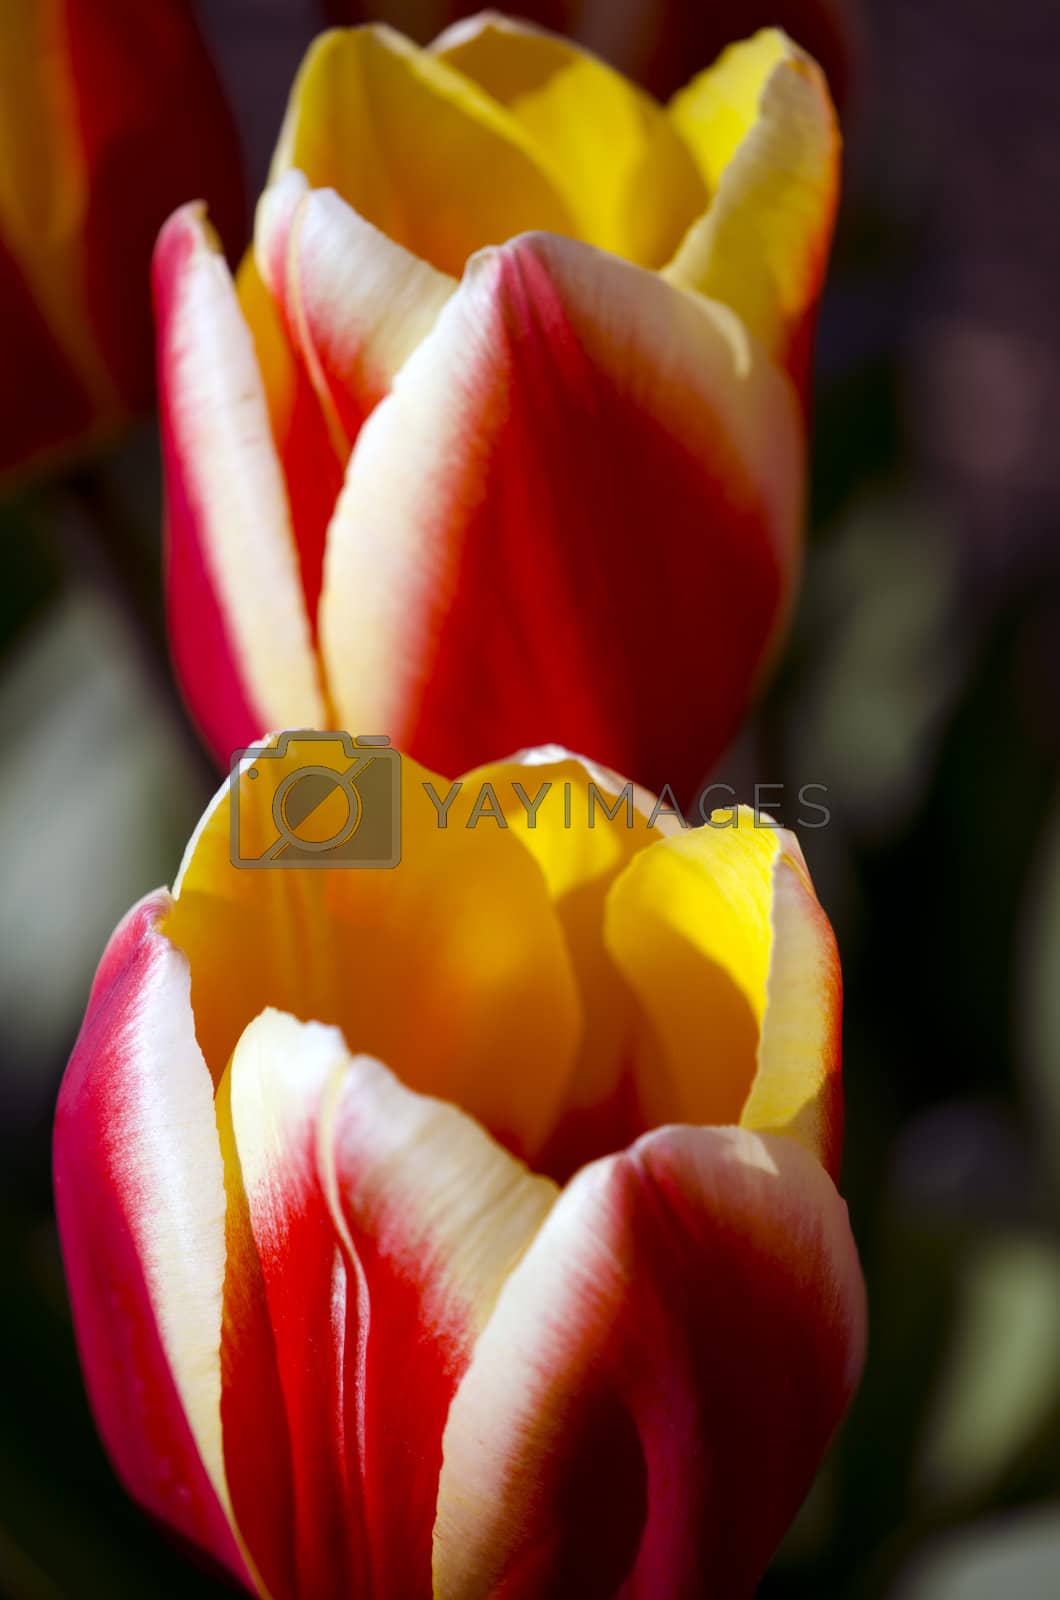 Royalty free image of two tullips by seattlephoto